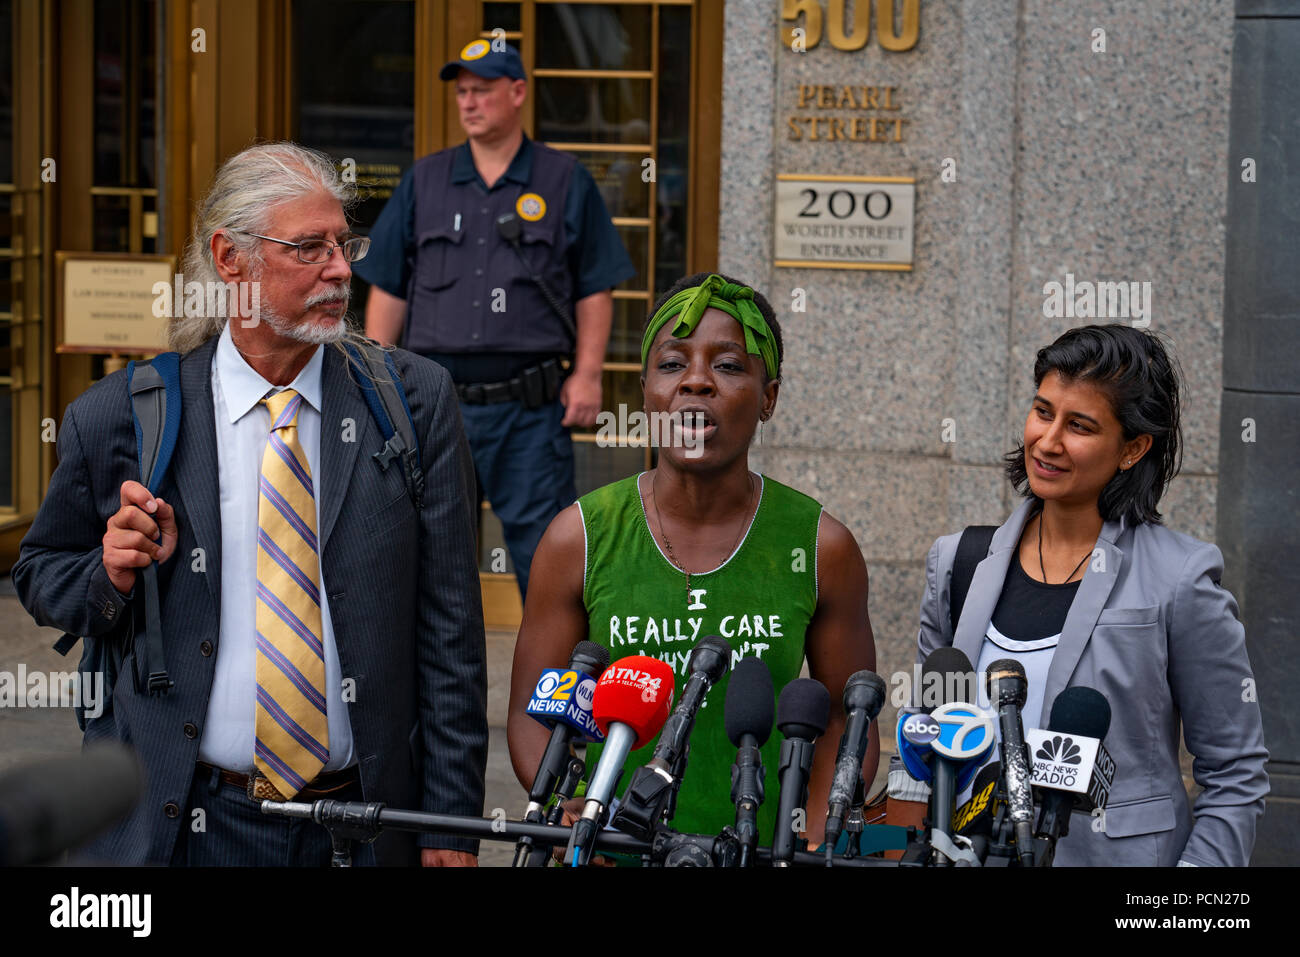 New York, New York, U.S., 3 August 2018 Immigration activist Therese Patricia Okoumou, with lawyers at her side, speaks outside federal court in Manhattan after hearing on trespassing & disorderly conduct charges.  Okoumou, a Congo native, scaled base of Statue of Liberty on July 4, 2018, to protest against Trump administration immigration policies.  Okoumou wore a green dress to court bearing the words “I really care why won’t u?” – a response to first lady Melania Trump, who wore a jacket with the words “I really don’t care, do u?” when she visited a facility for migrant children in June. Stock Photo